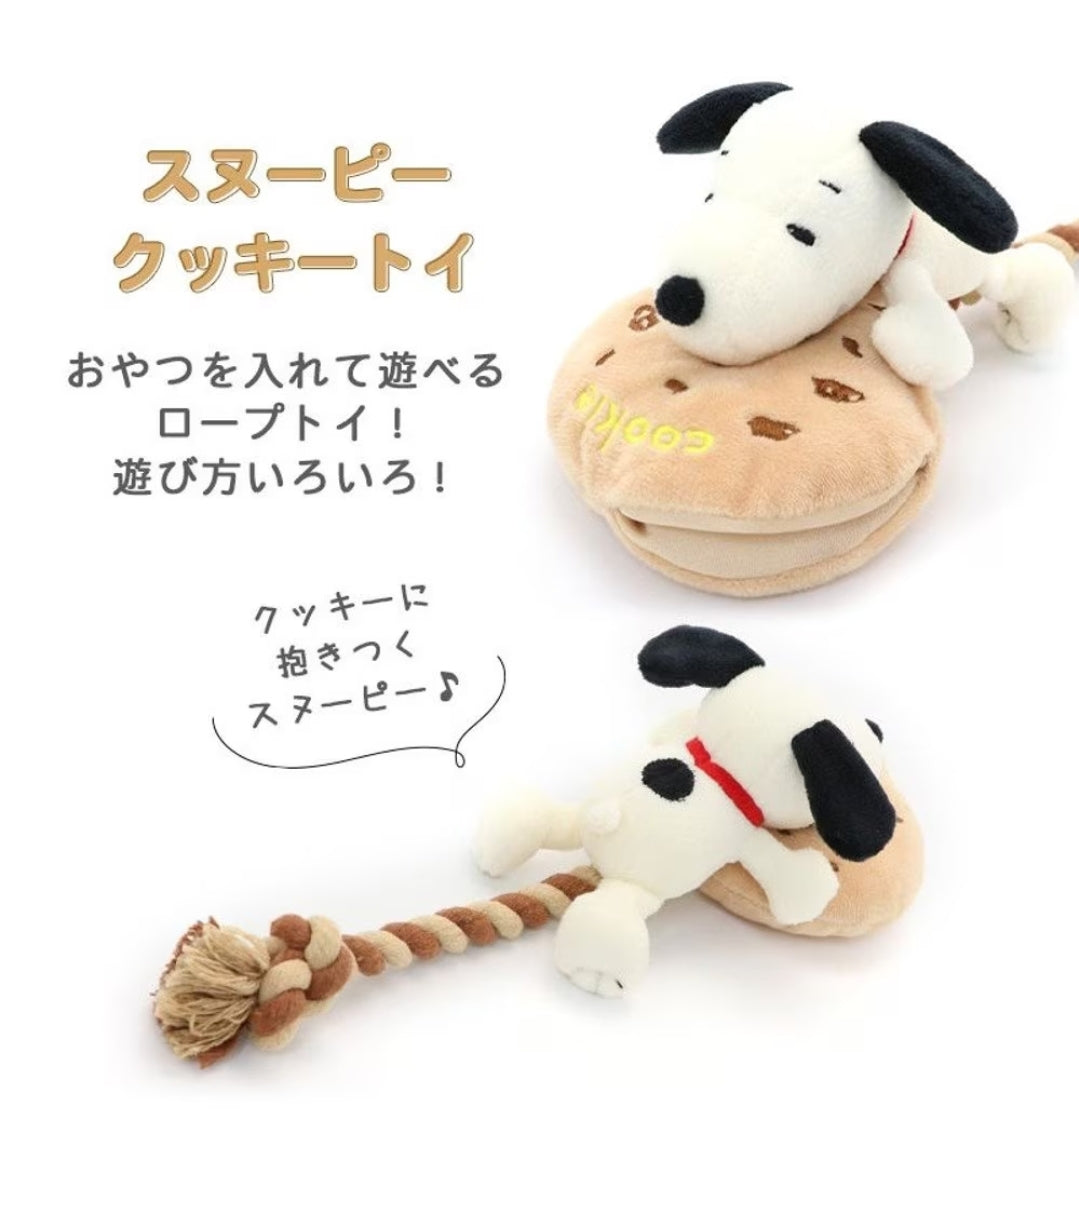 Pet Paradise Snoopy Cookies Rope Toy